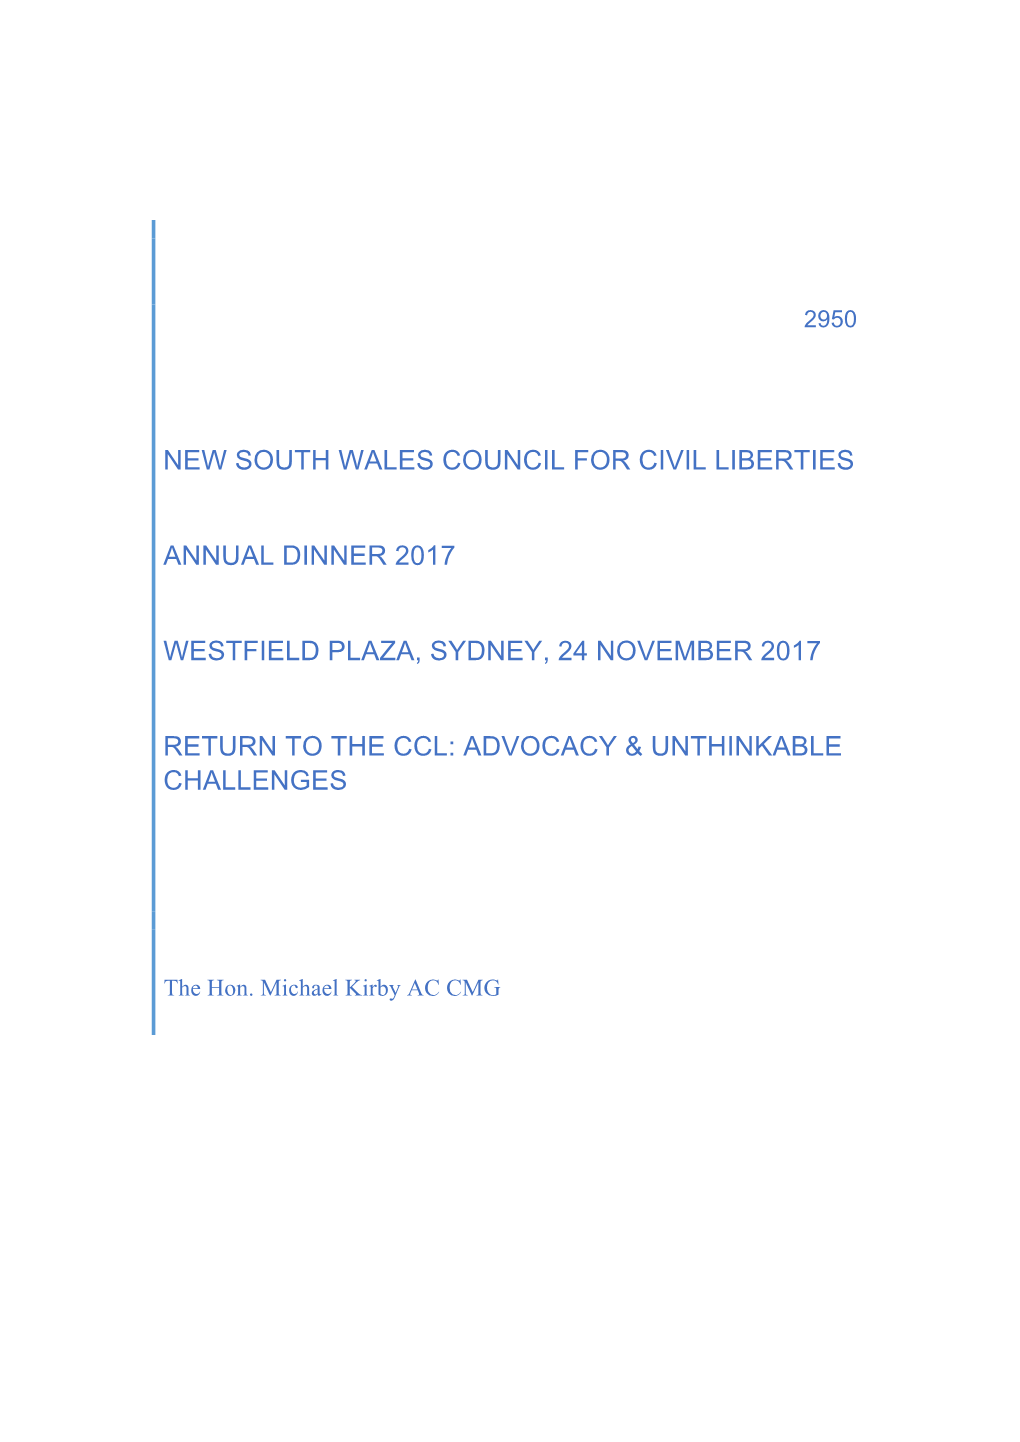 New South Wales Council for Civil Liberties Annual Dinner 2017 Westfield Plaza, Sydney, 24 November 2017 Return to the Ccl